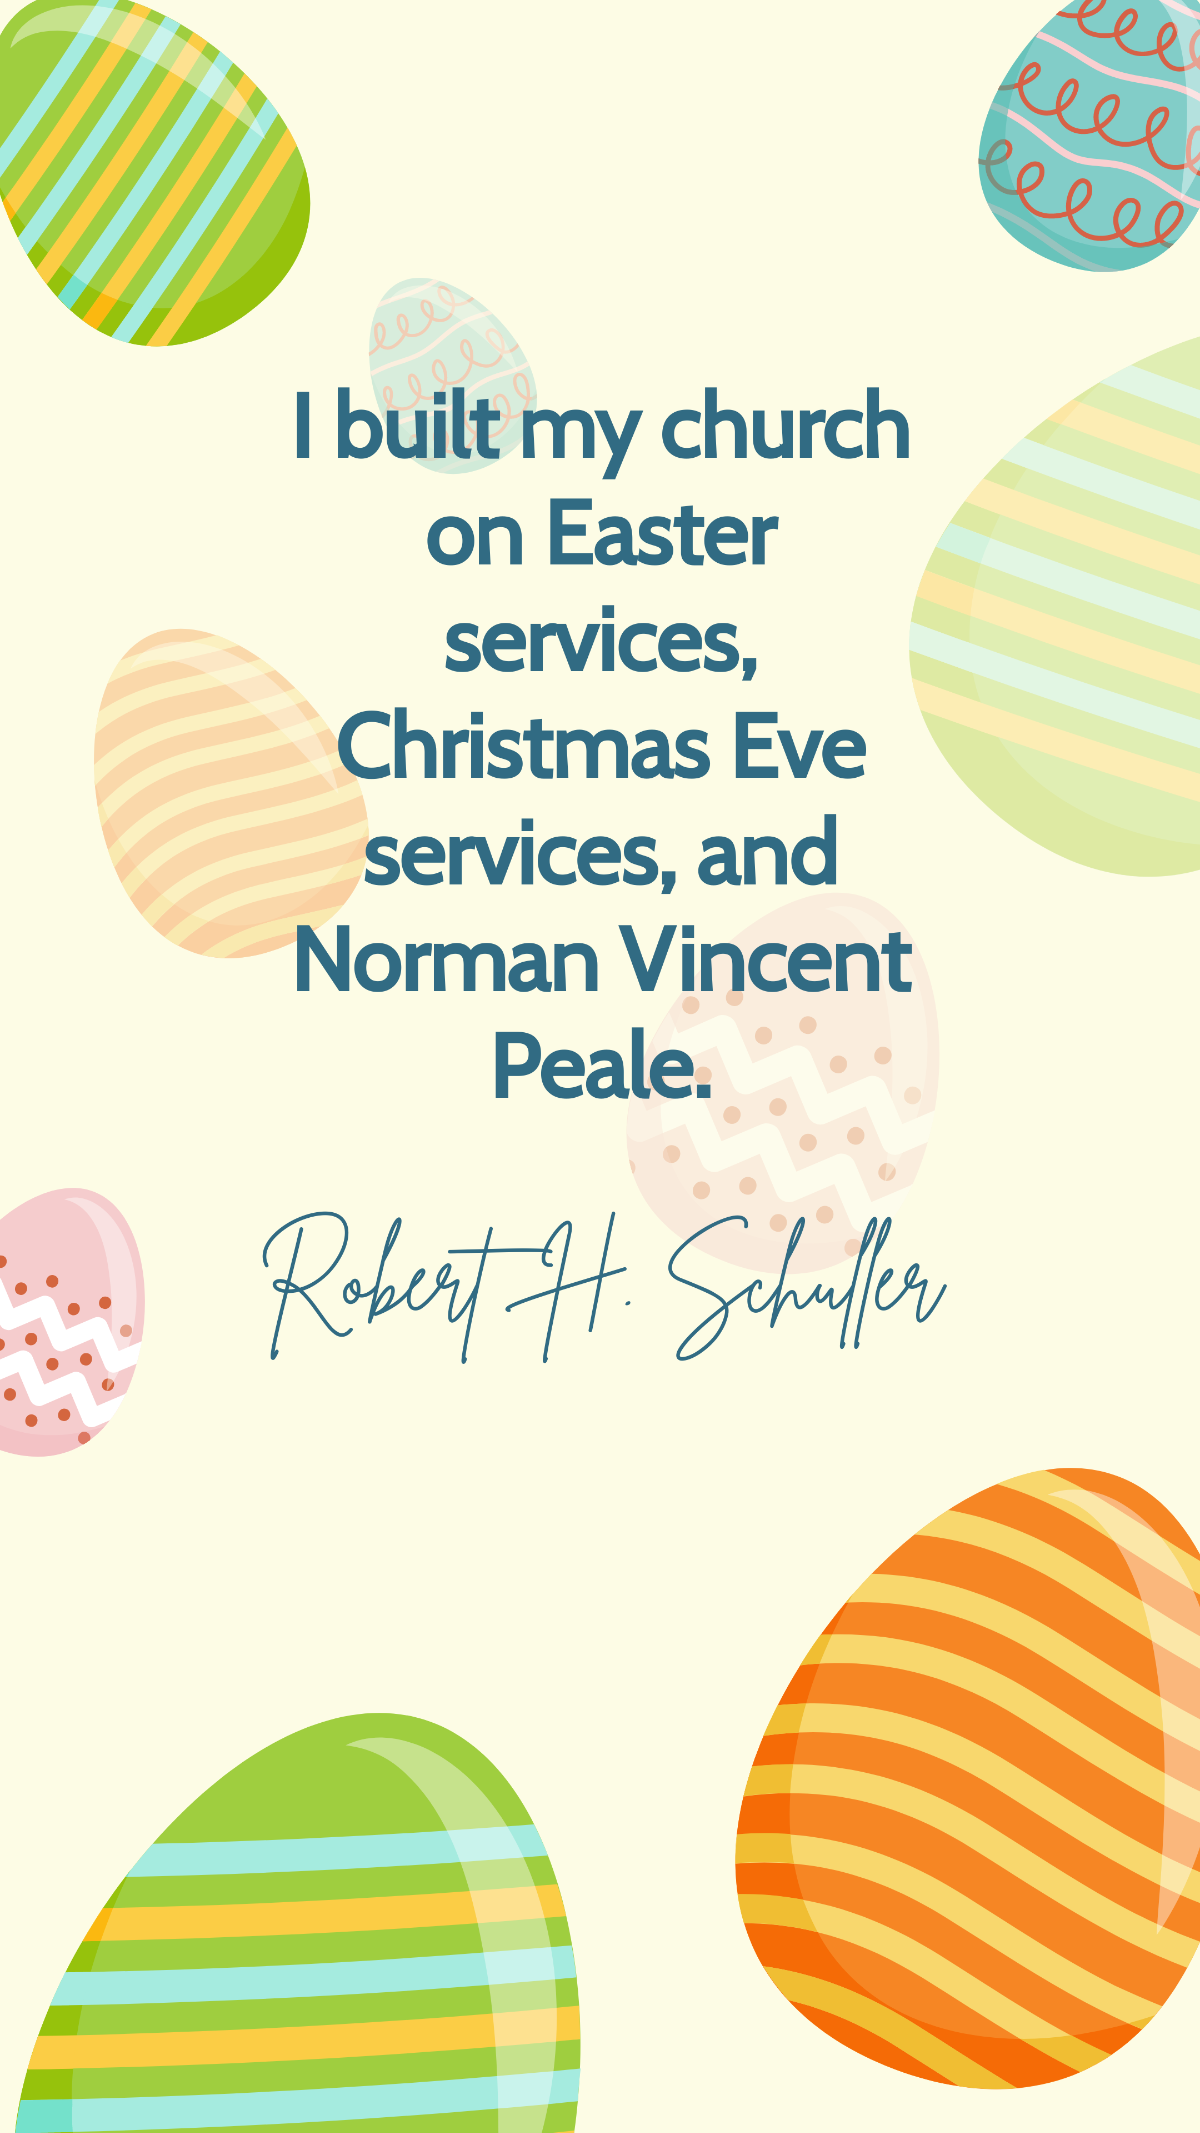 Robert H. Schuller - I built my church on Easter services, Christmas Eve services, and Norman Vincent Peale. Template